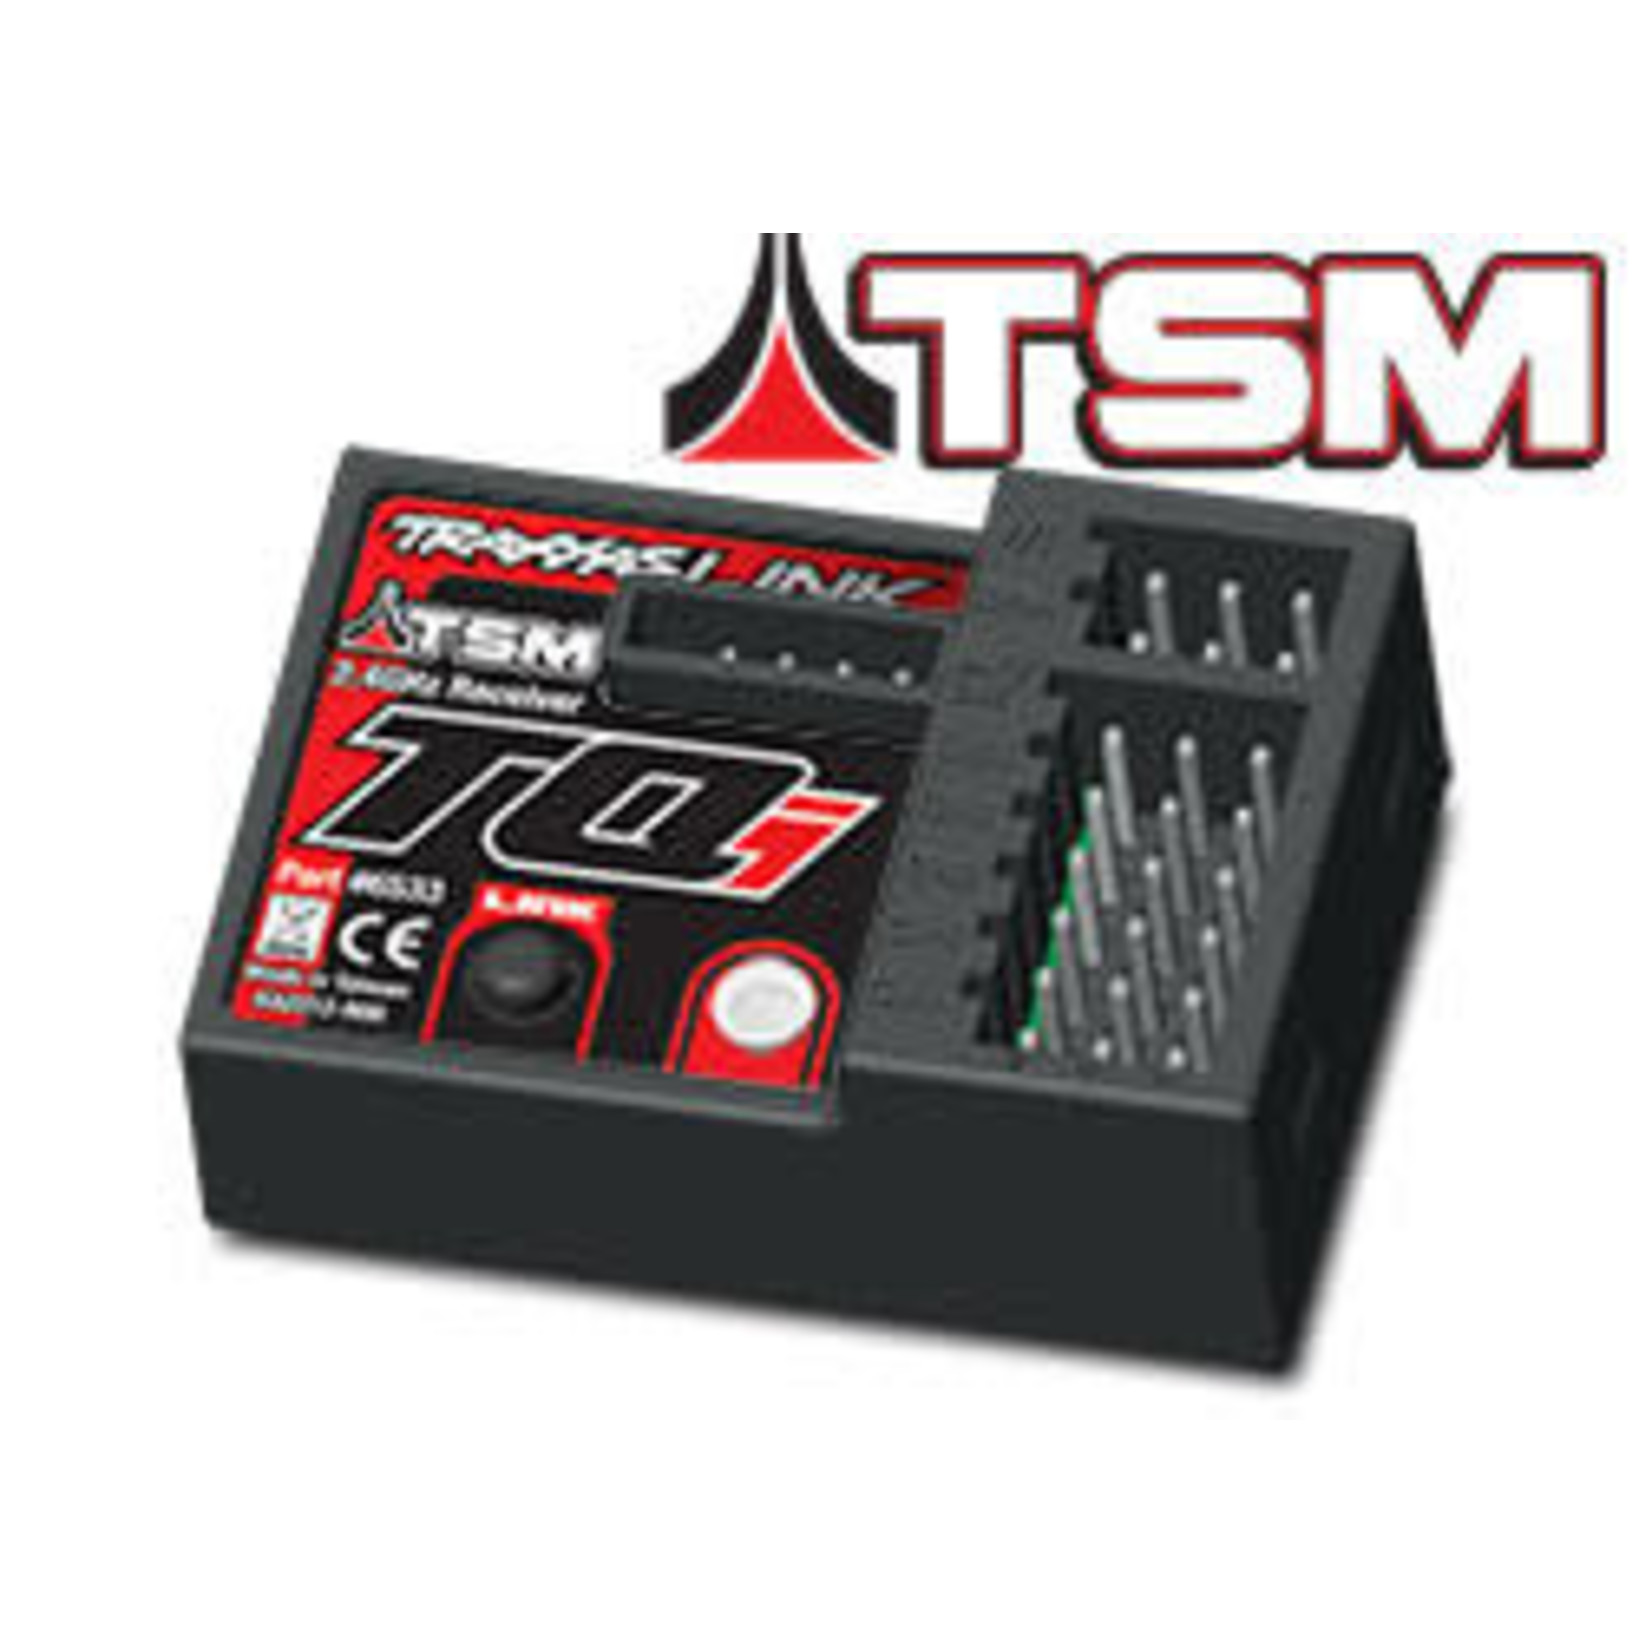 Traxxas 6533 Receiver, micro, TQi 2.4GHz with telemetry & TSM (5-channel)